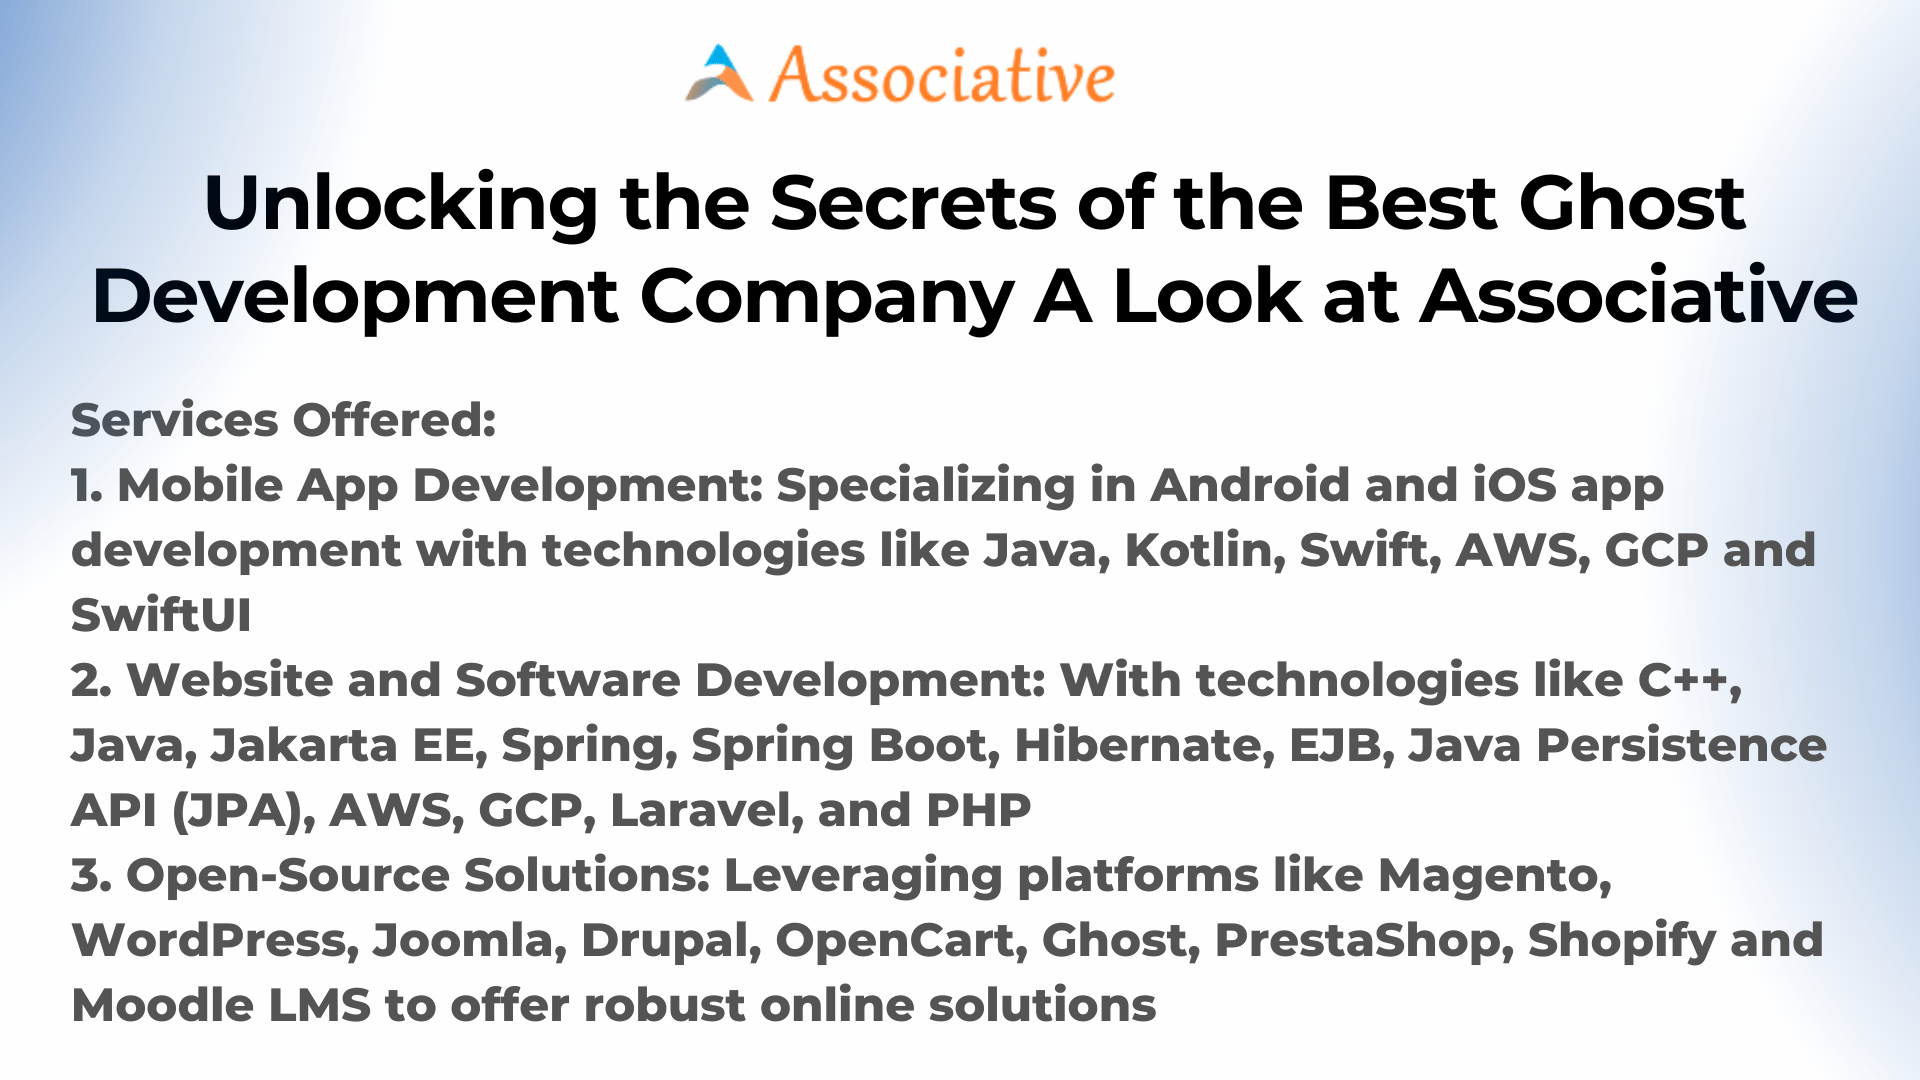 Unlocking the Secrets of the Best Ghost Development Company A Look at Associative